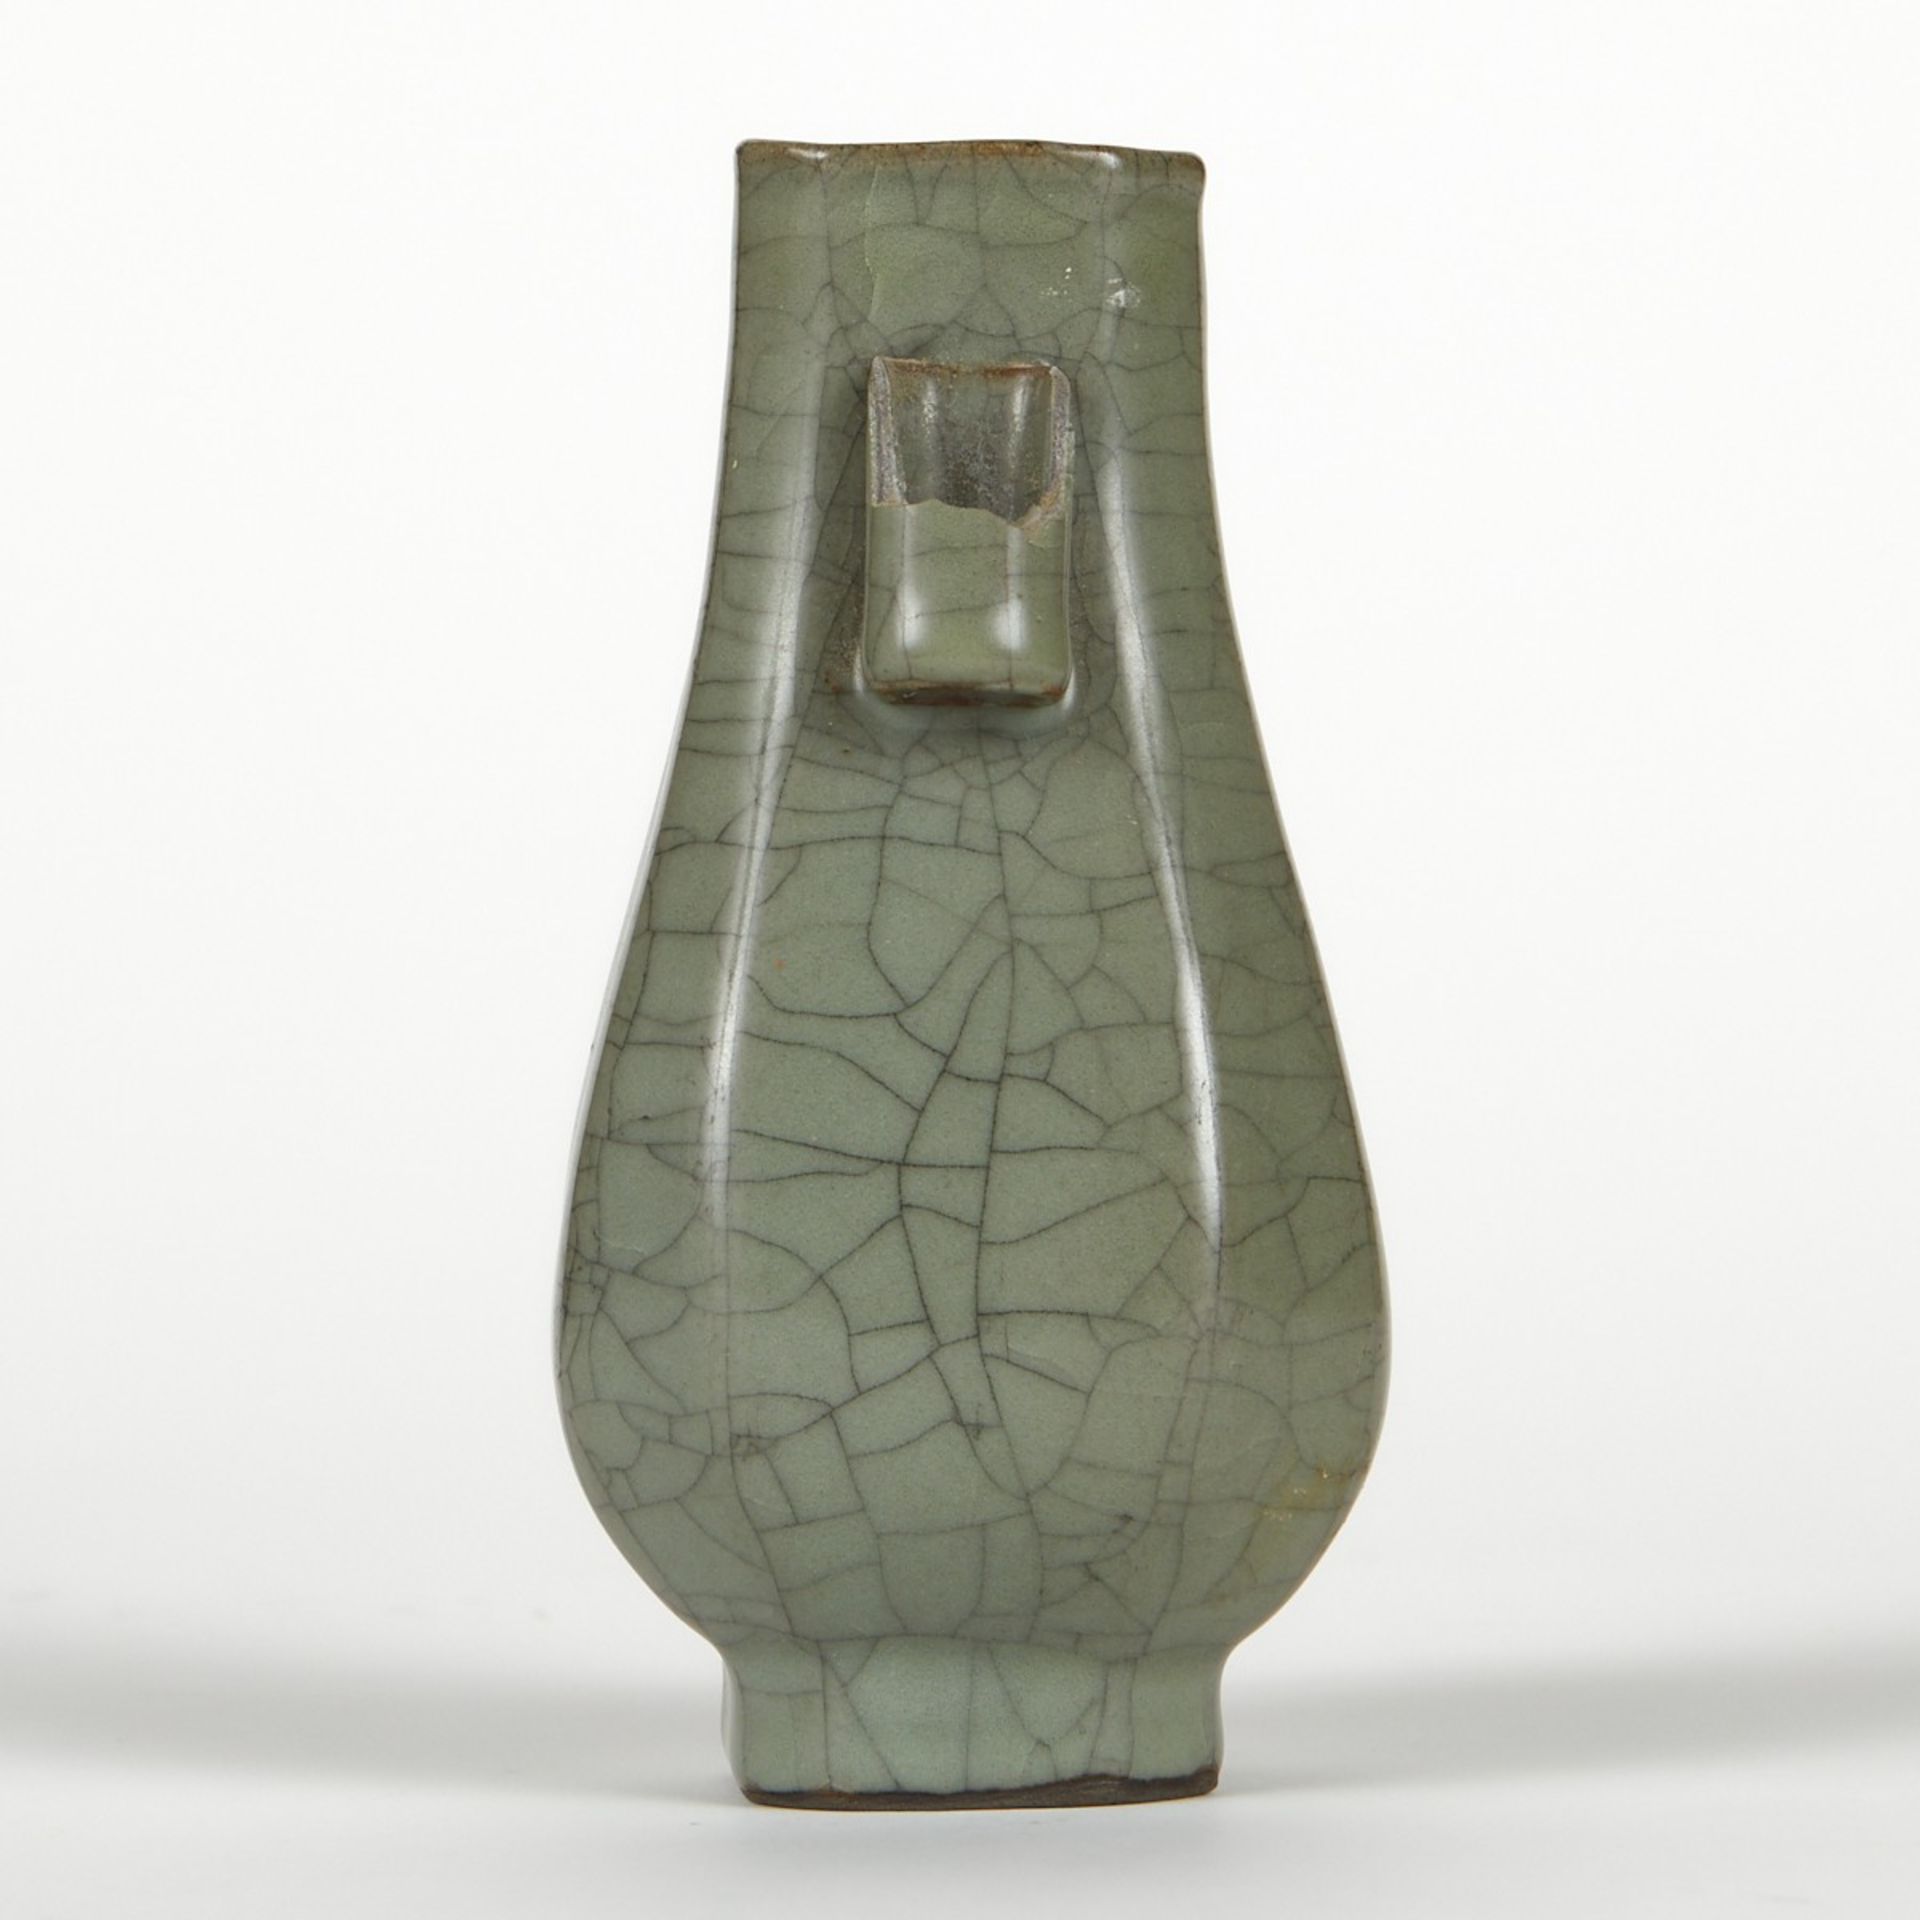 Chinese High Fired Ceramic Crackle Hu Vase - Image 5 of 7